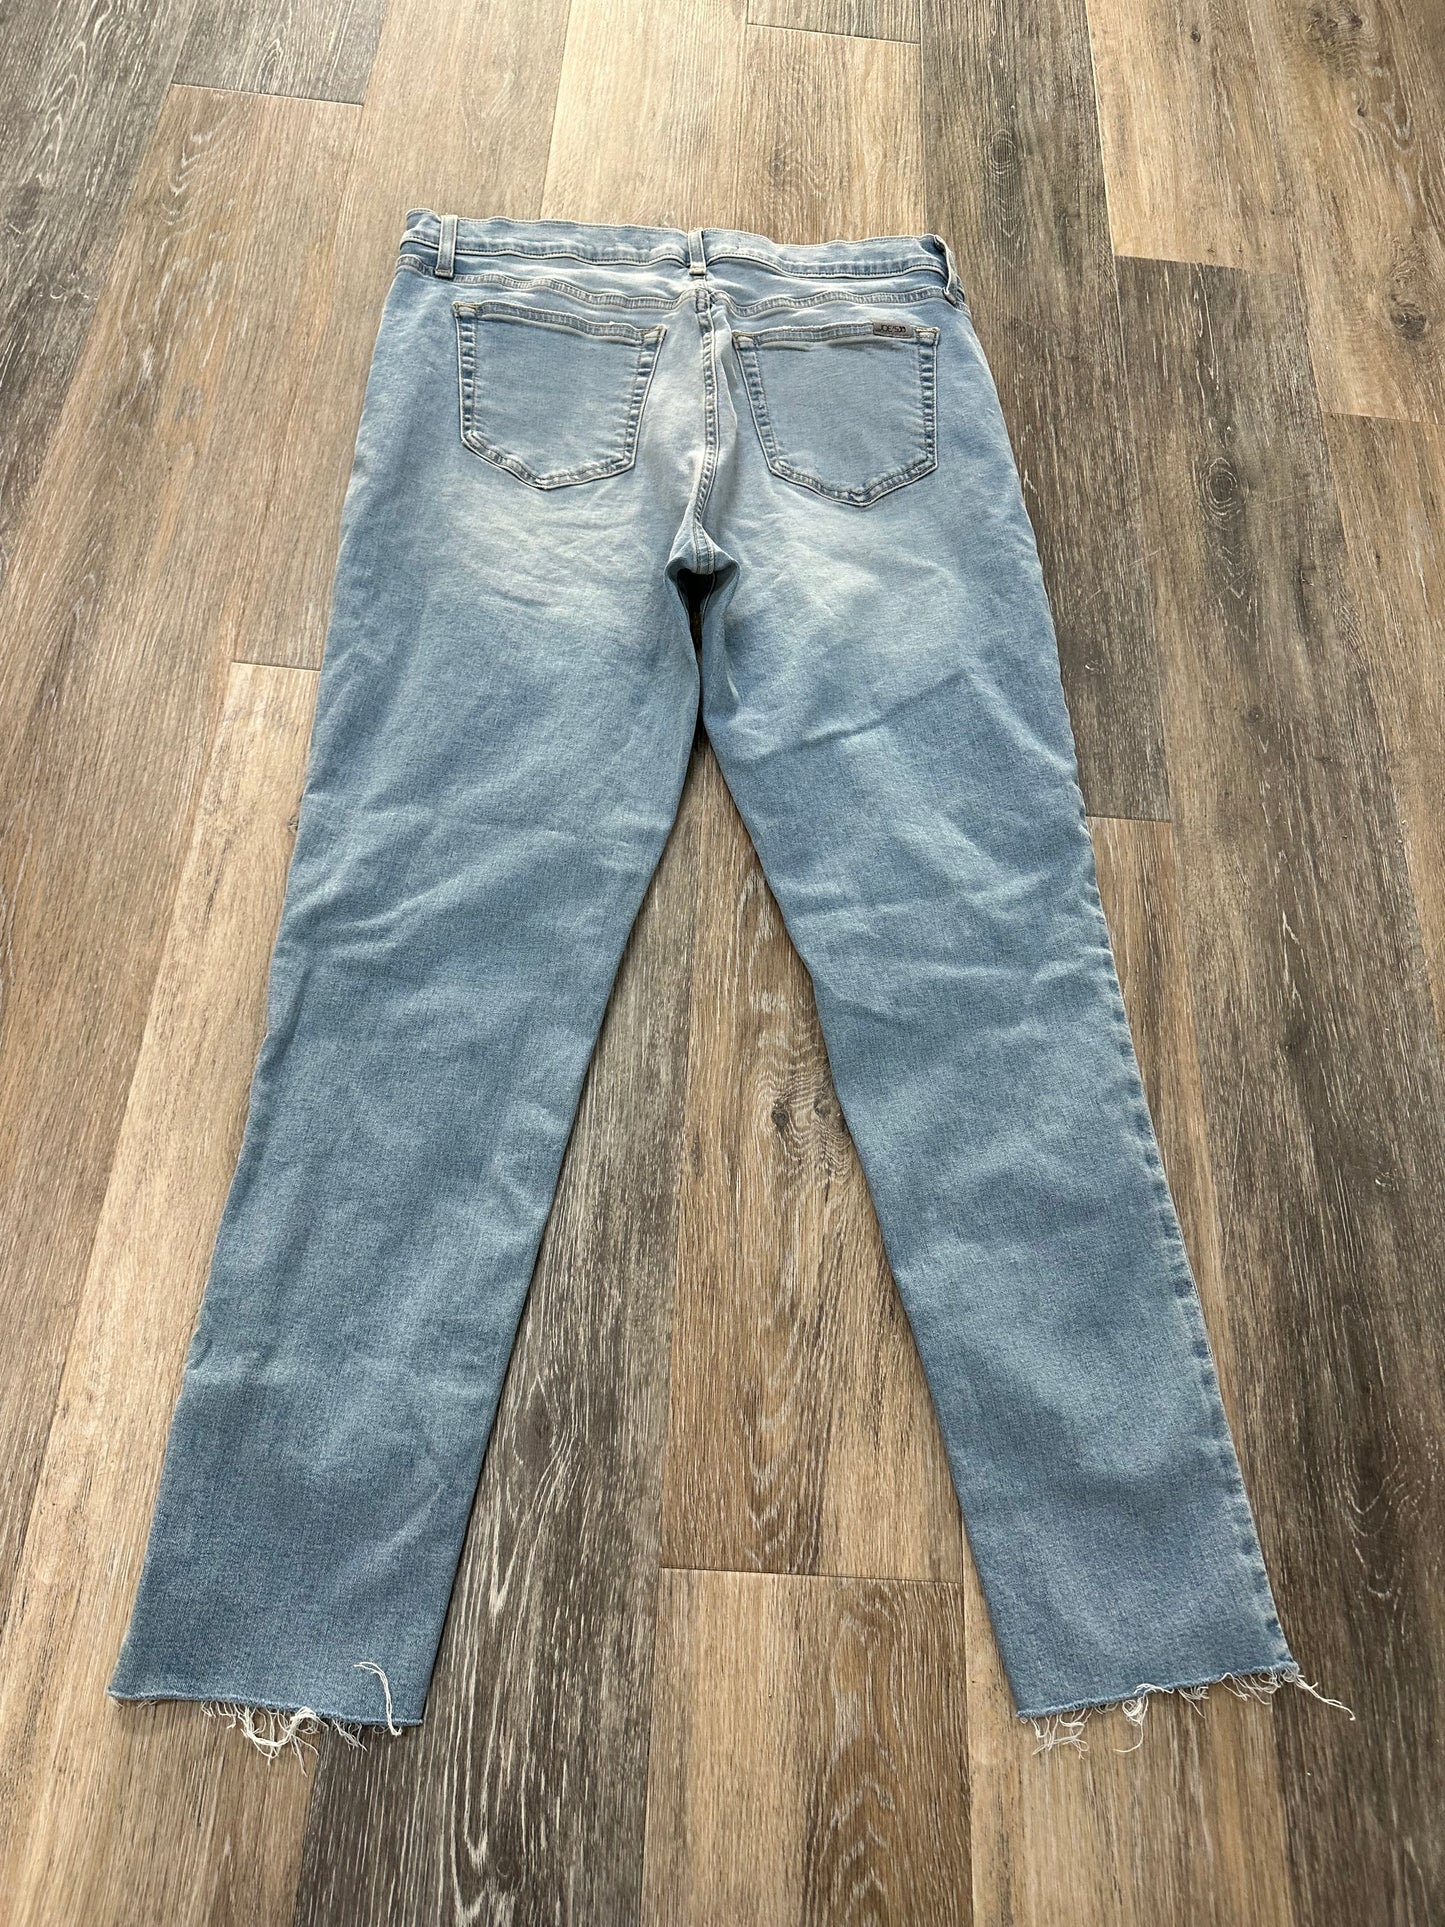 Jeans Skinny By Joes Jeans  Size: 14